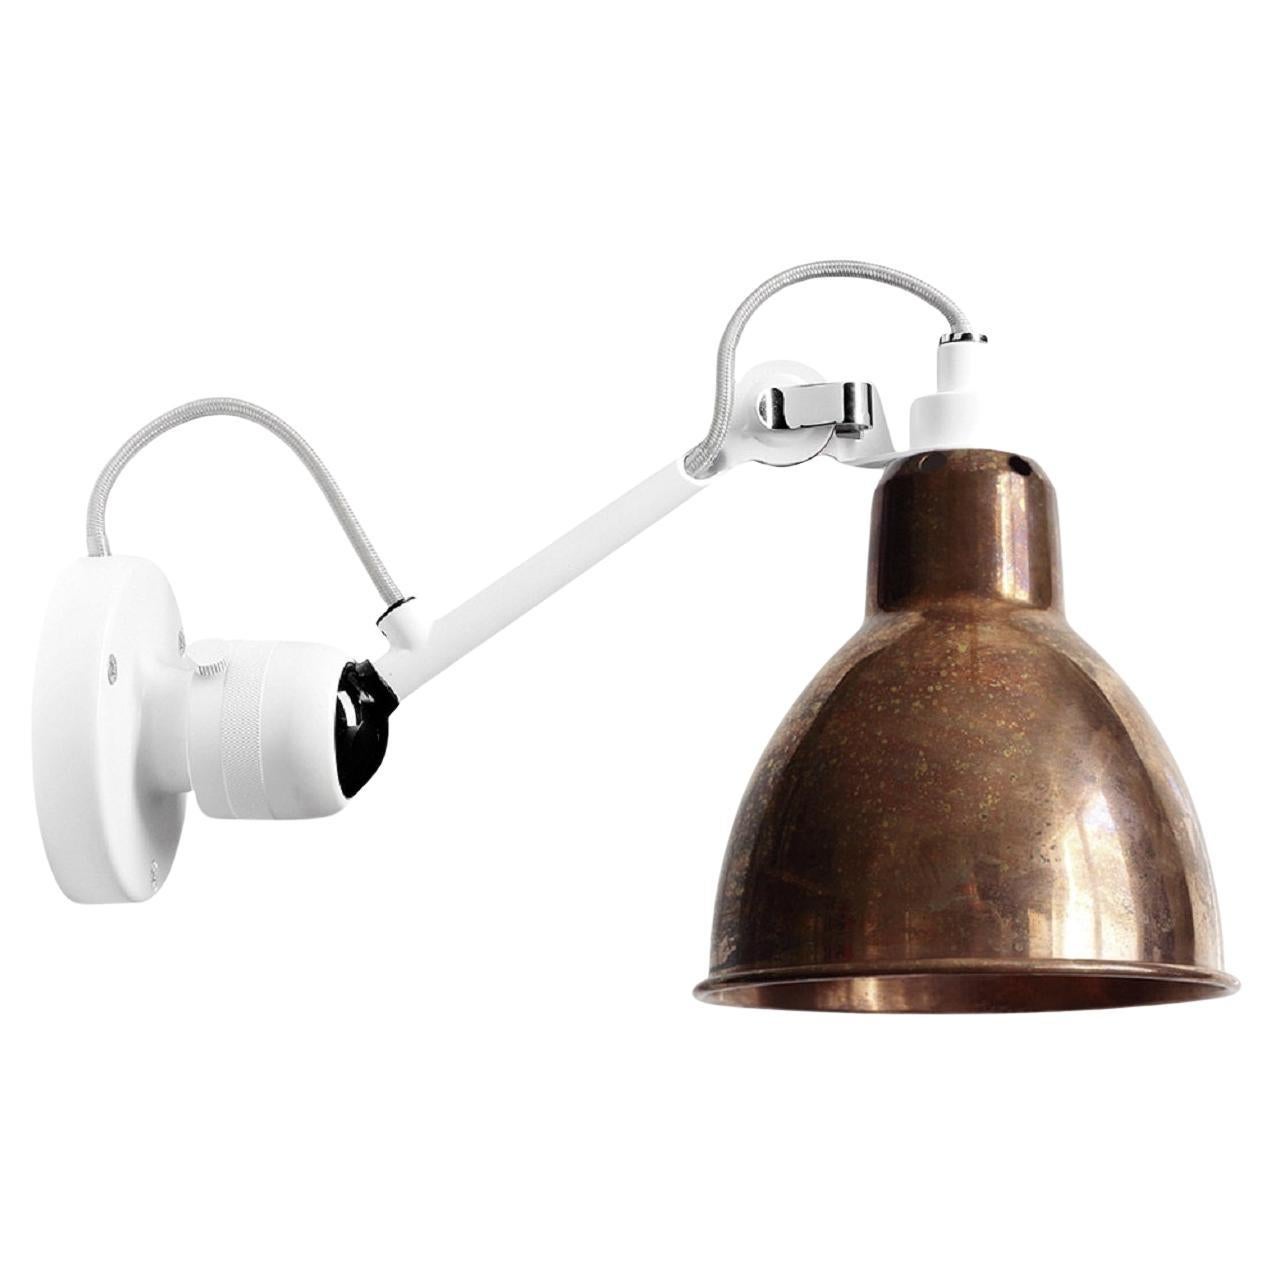 DCW Editions La Lampe Gras N°304 Wall Lamp in White Arm and Raw Copper Shade For Sale